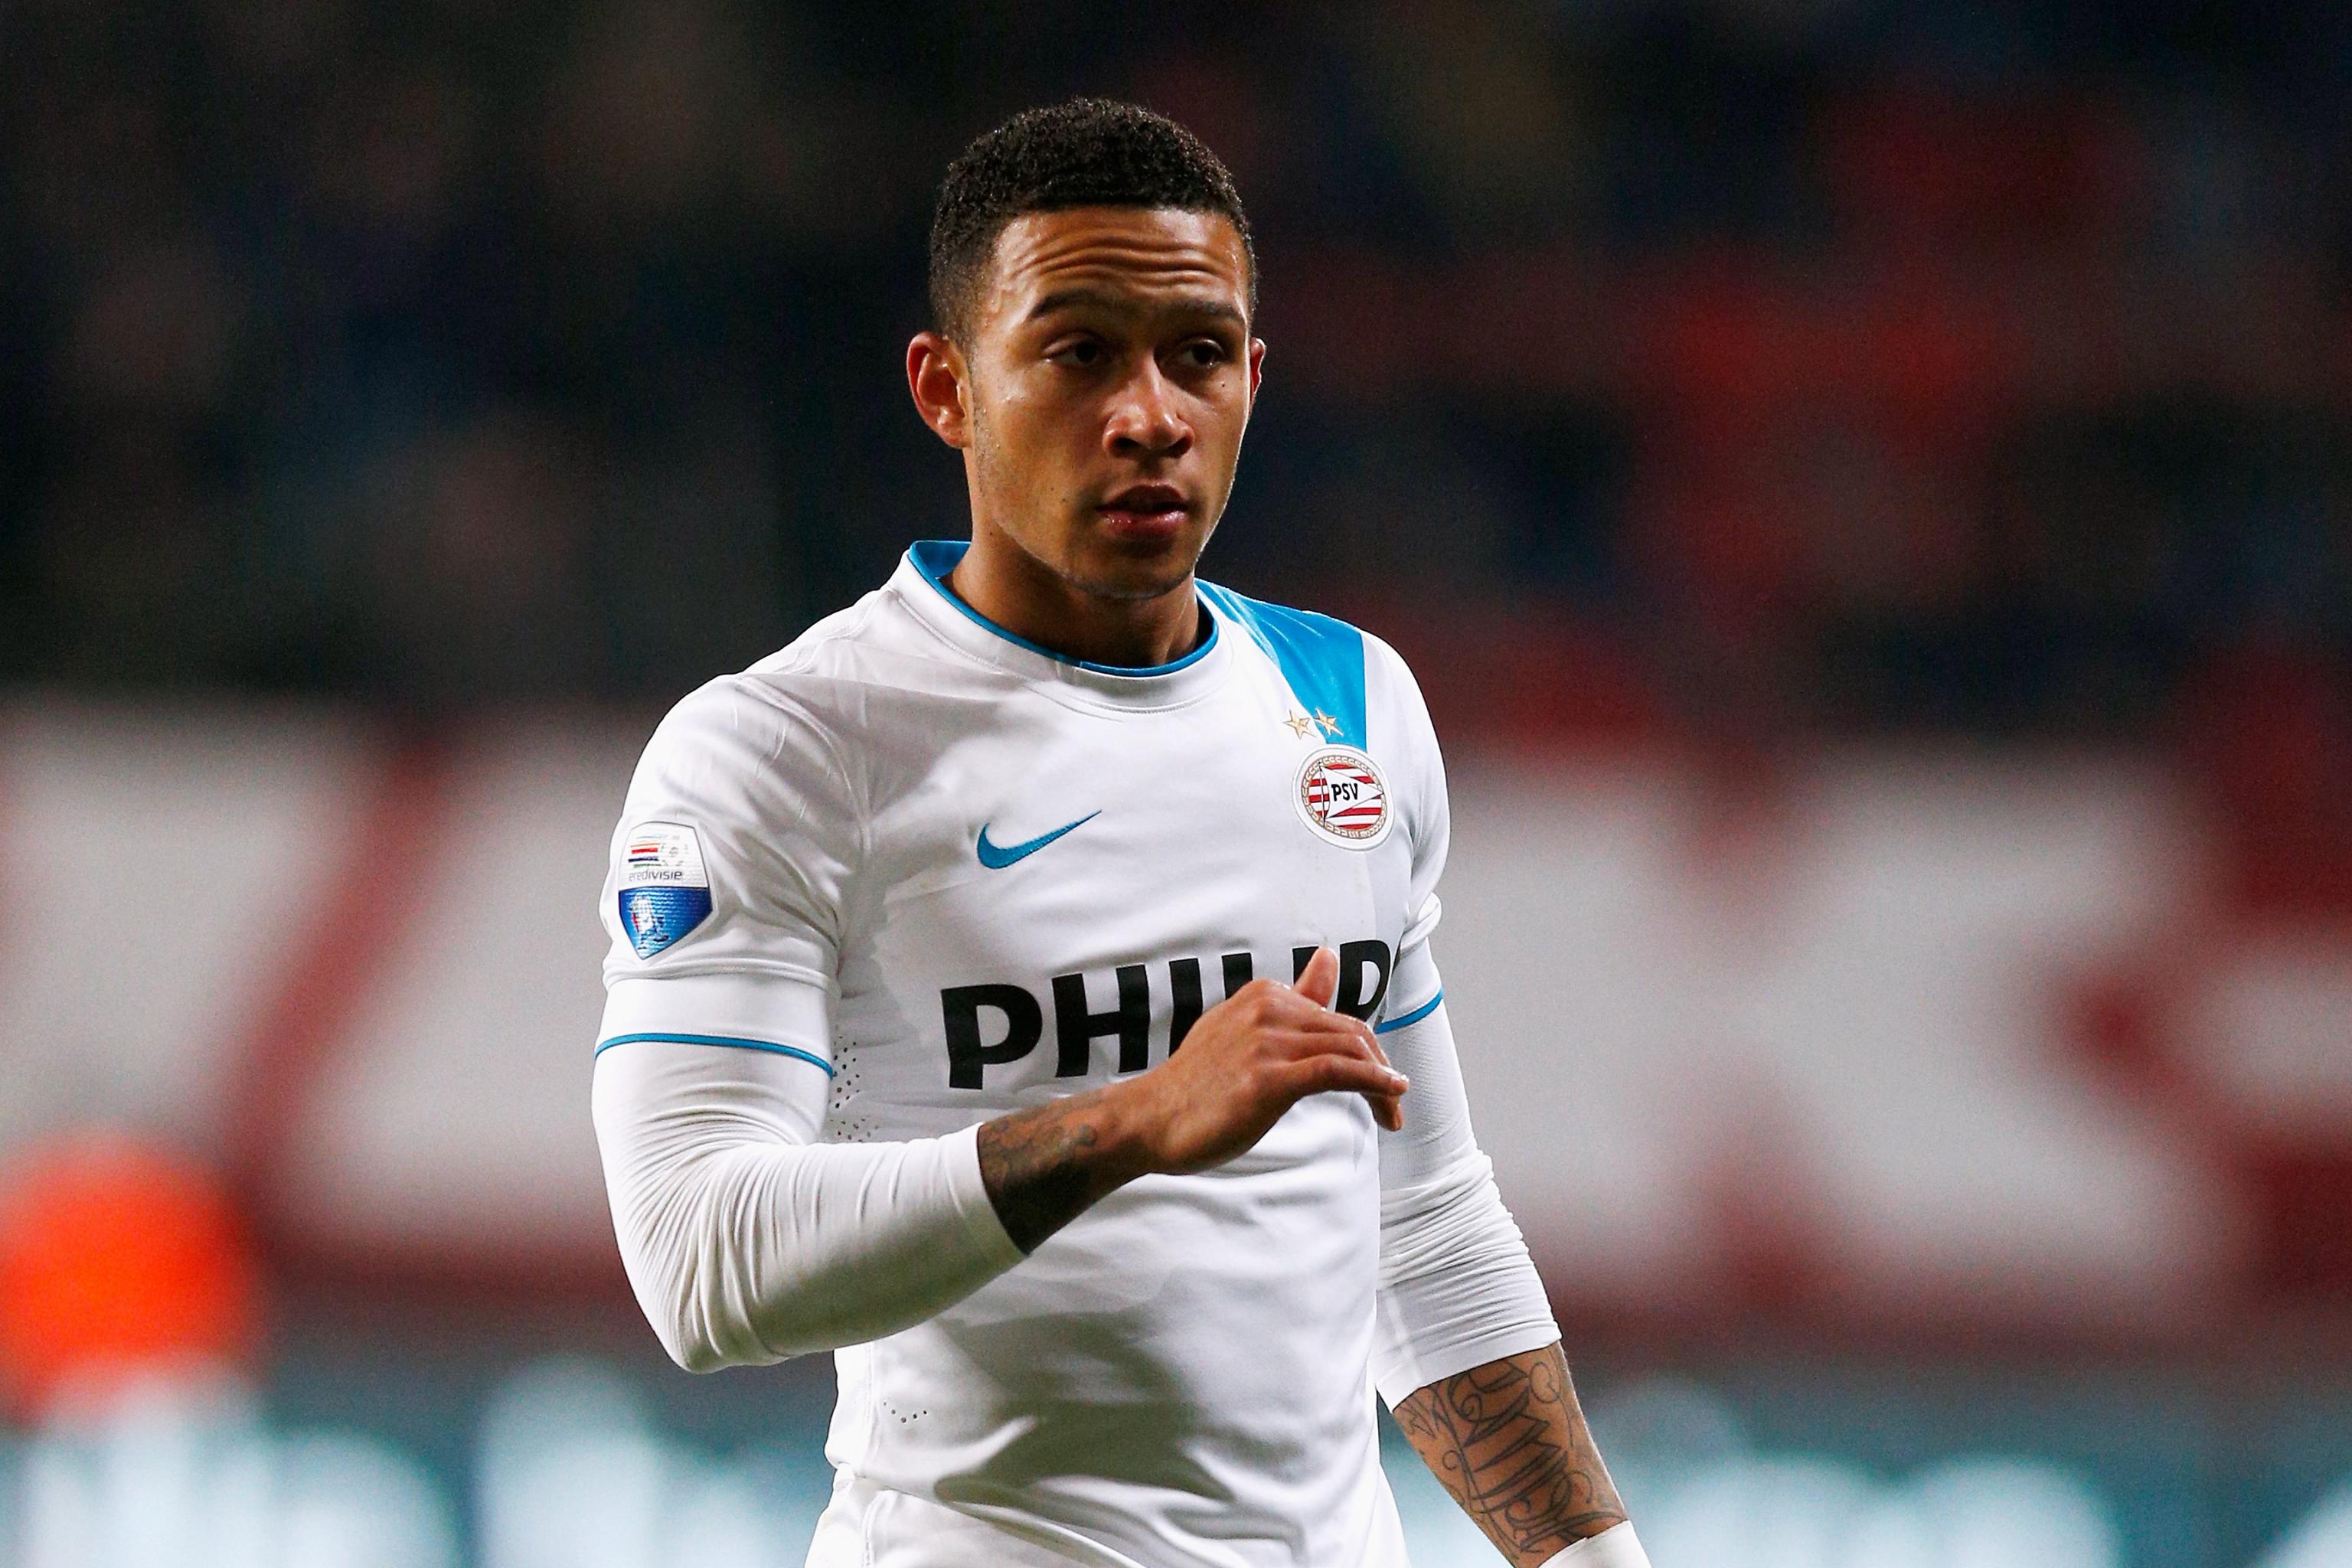 Manchester United winger Memphis Depay returns to PSV to say